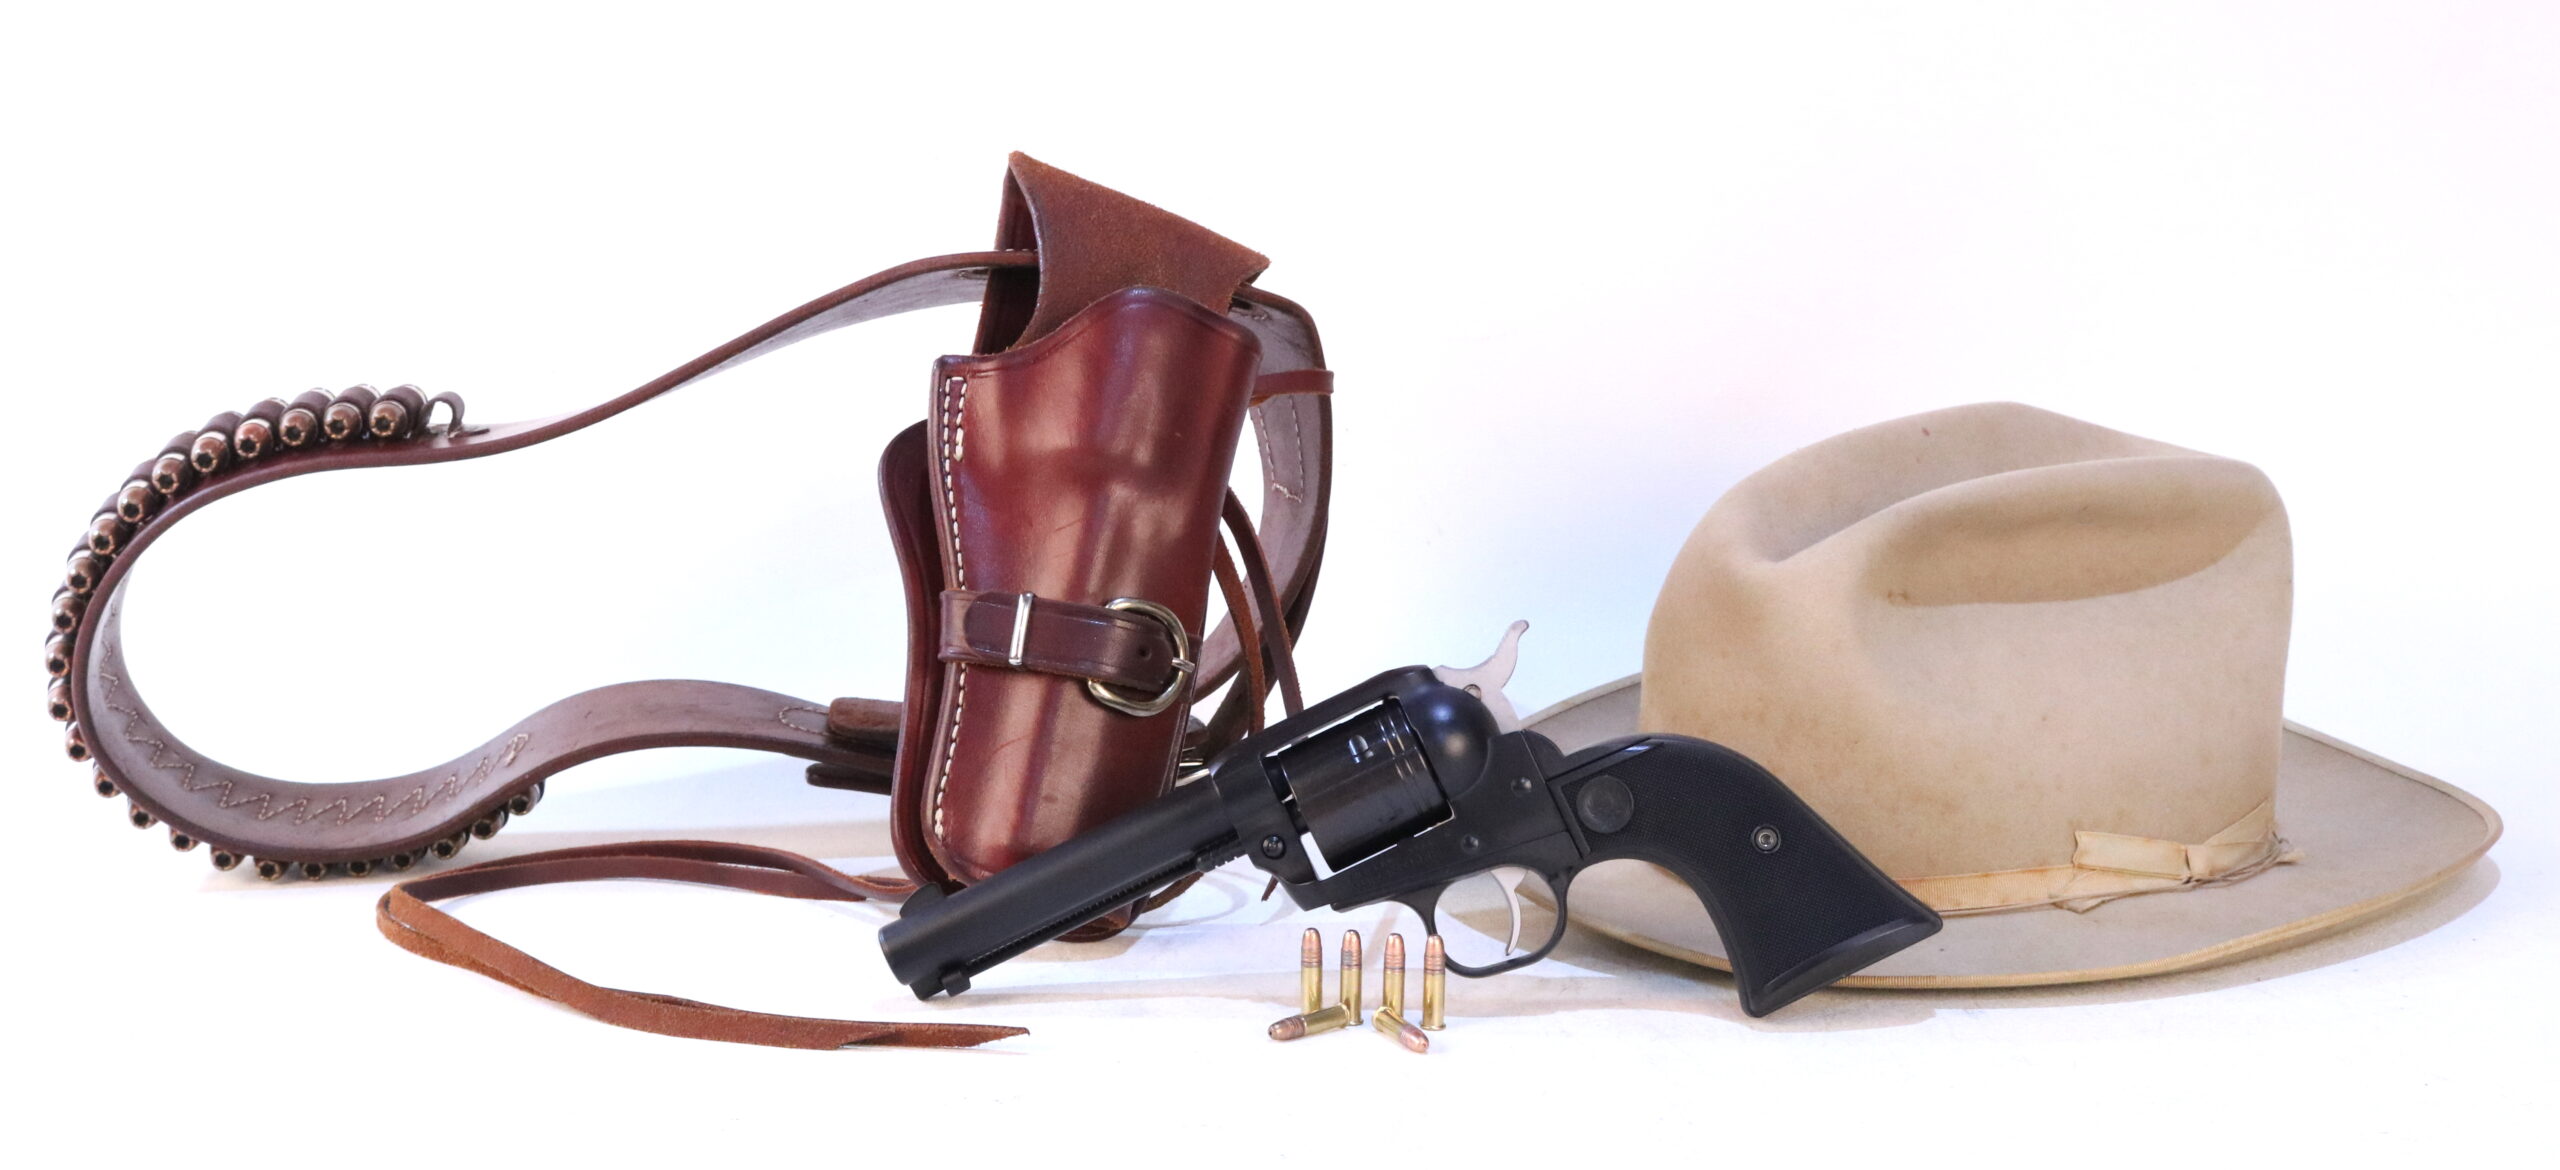 The Magnificent Ruger Wrangler .22 The Cool Inexpensive Cowboy Simulator -  Small Arms Review